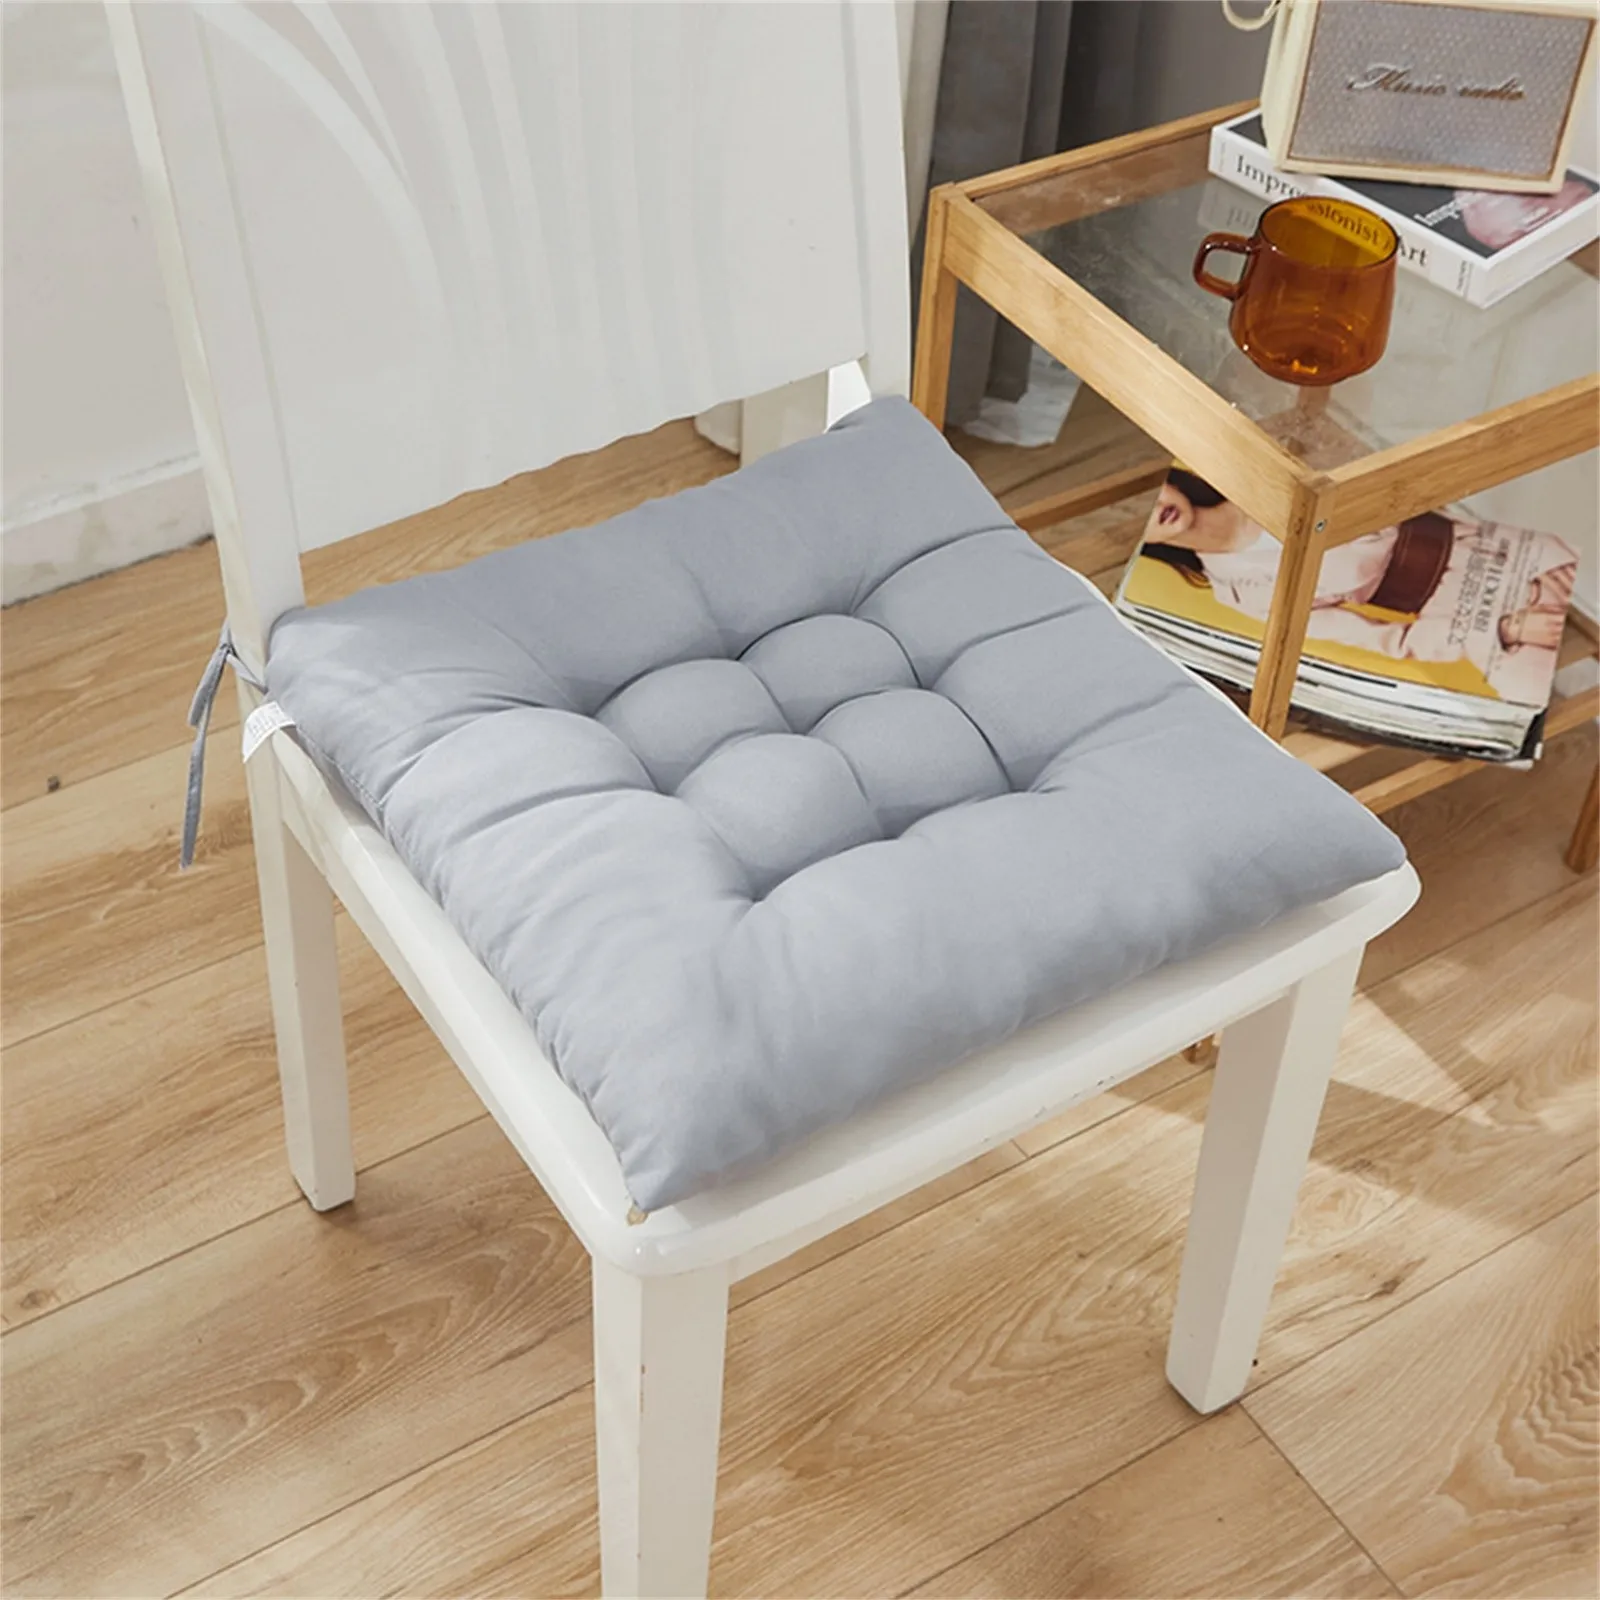 Solid Color Chair Cushion 40x40cm Soft Thicken Pad Chair Cushion Tie on Seat Dining Room Kitchen Office Decor Backrest Pillow